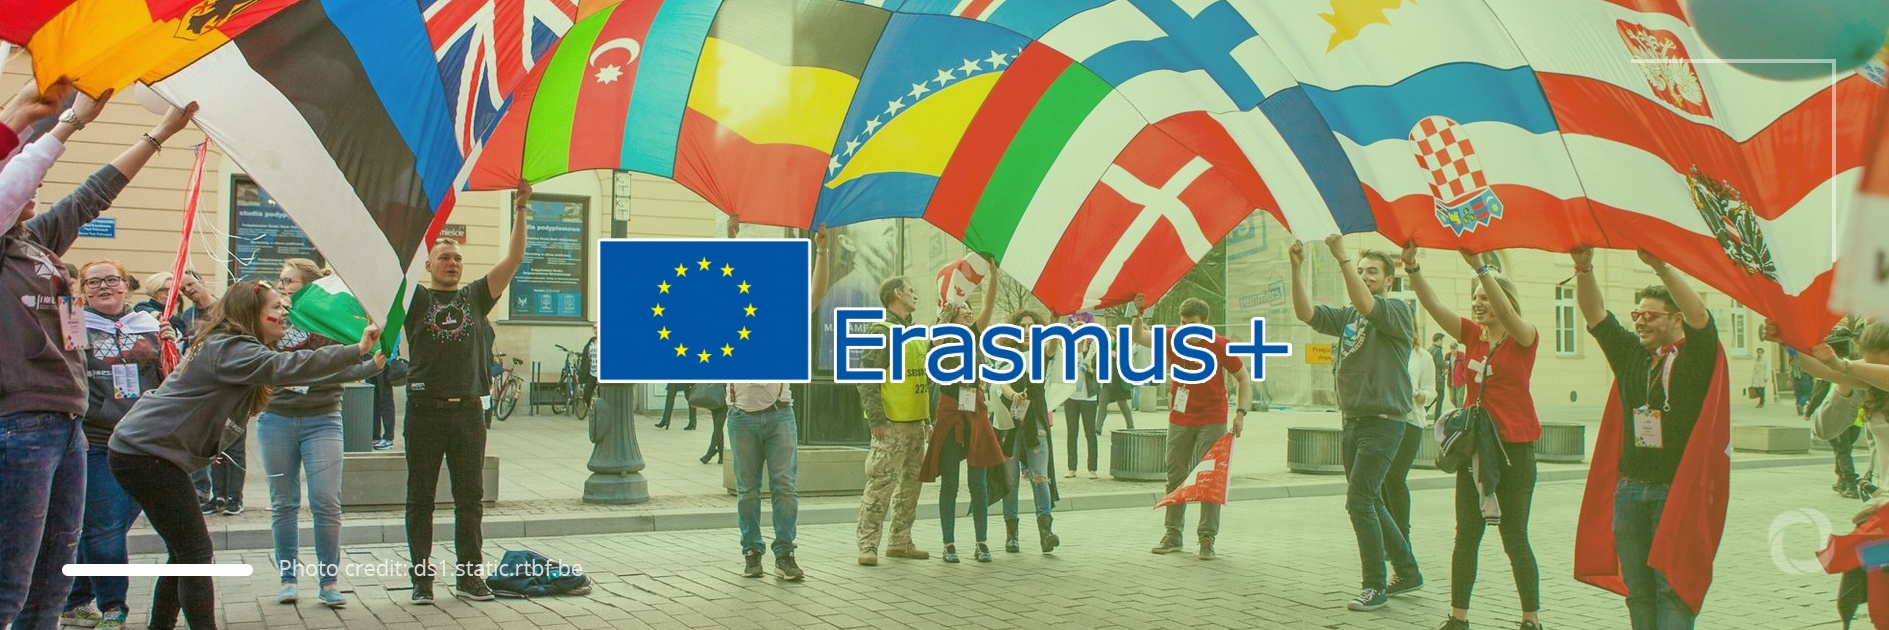 49 Nepalese students receive EU's Erasmus+ scholarships to study in Europe